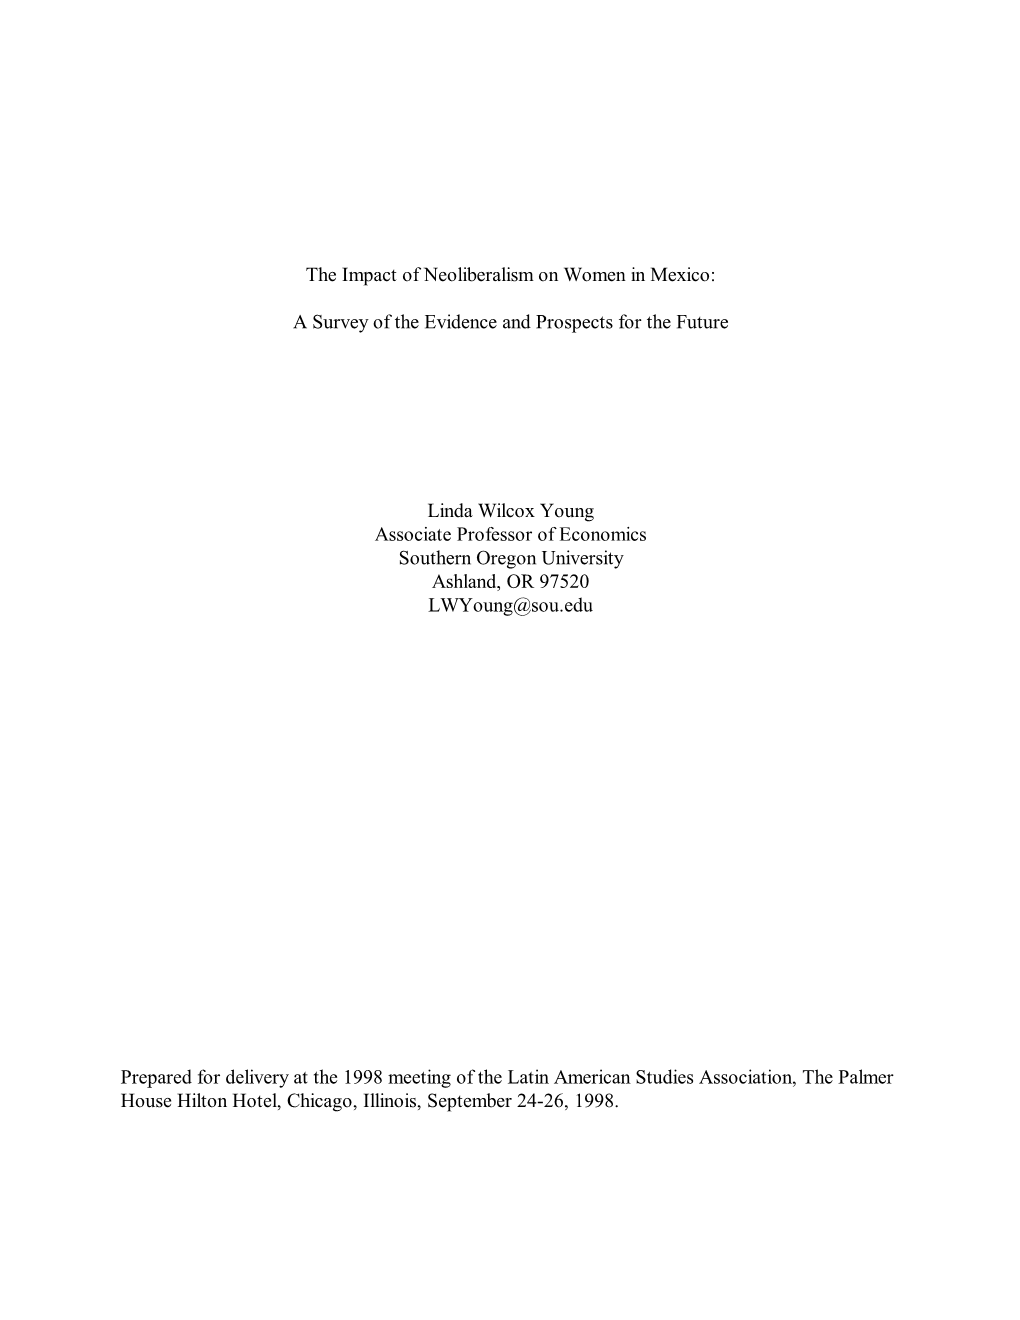 The Impact of Neoliberalism on Women in Mexico: a Survey of The